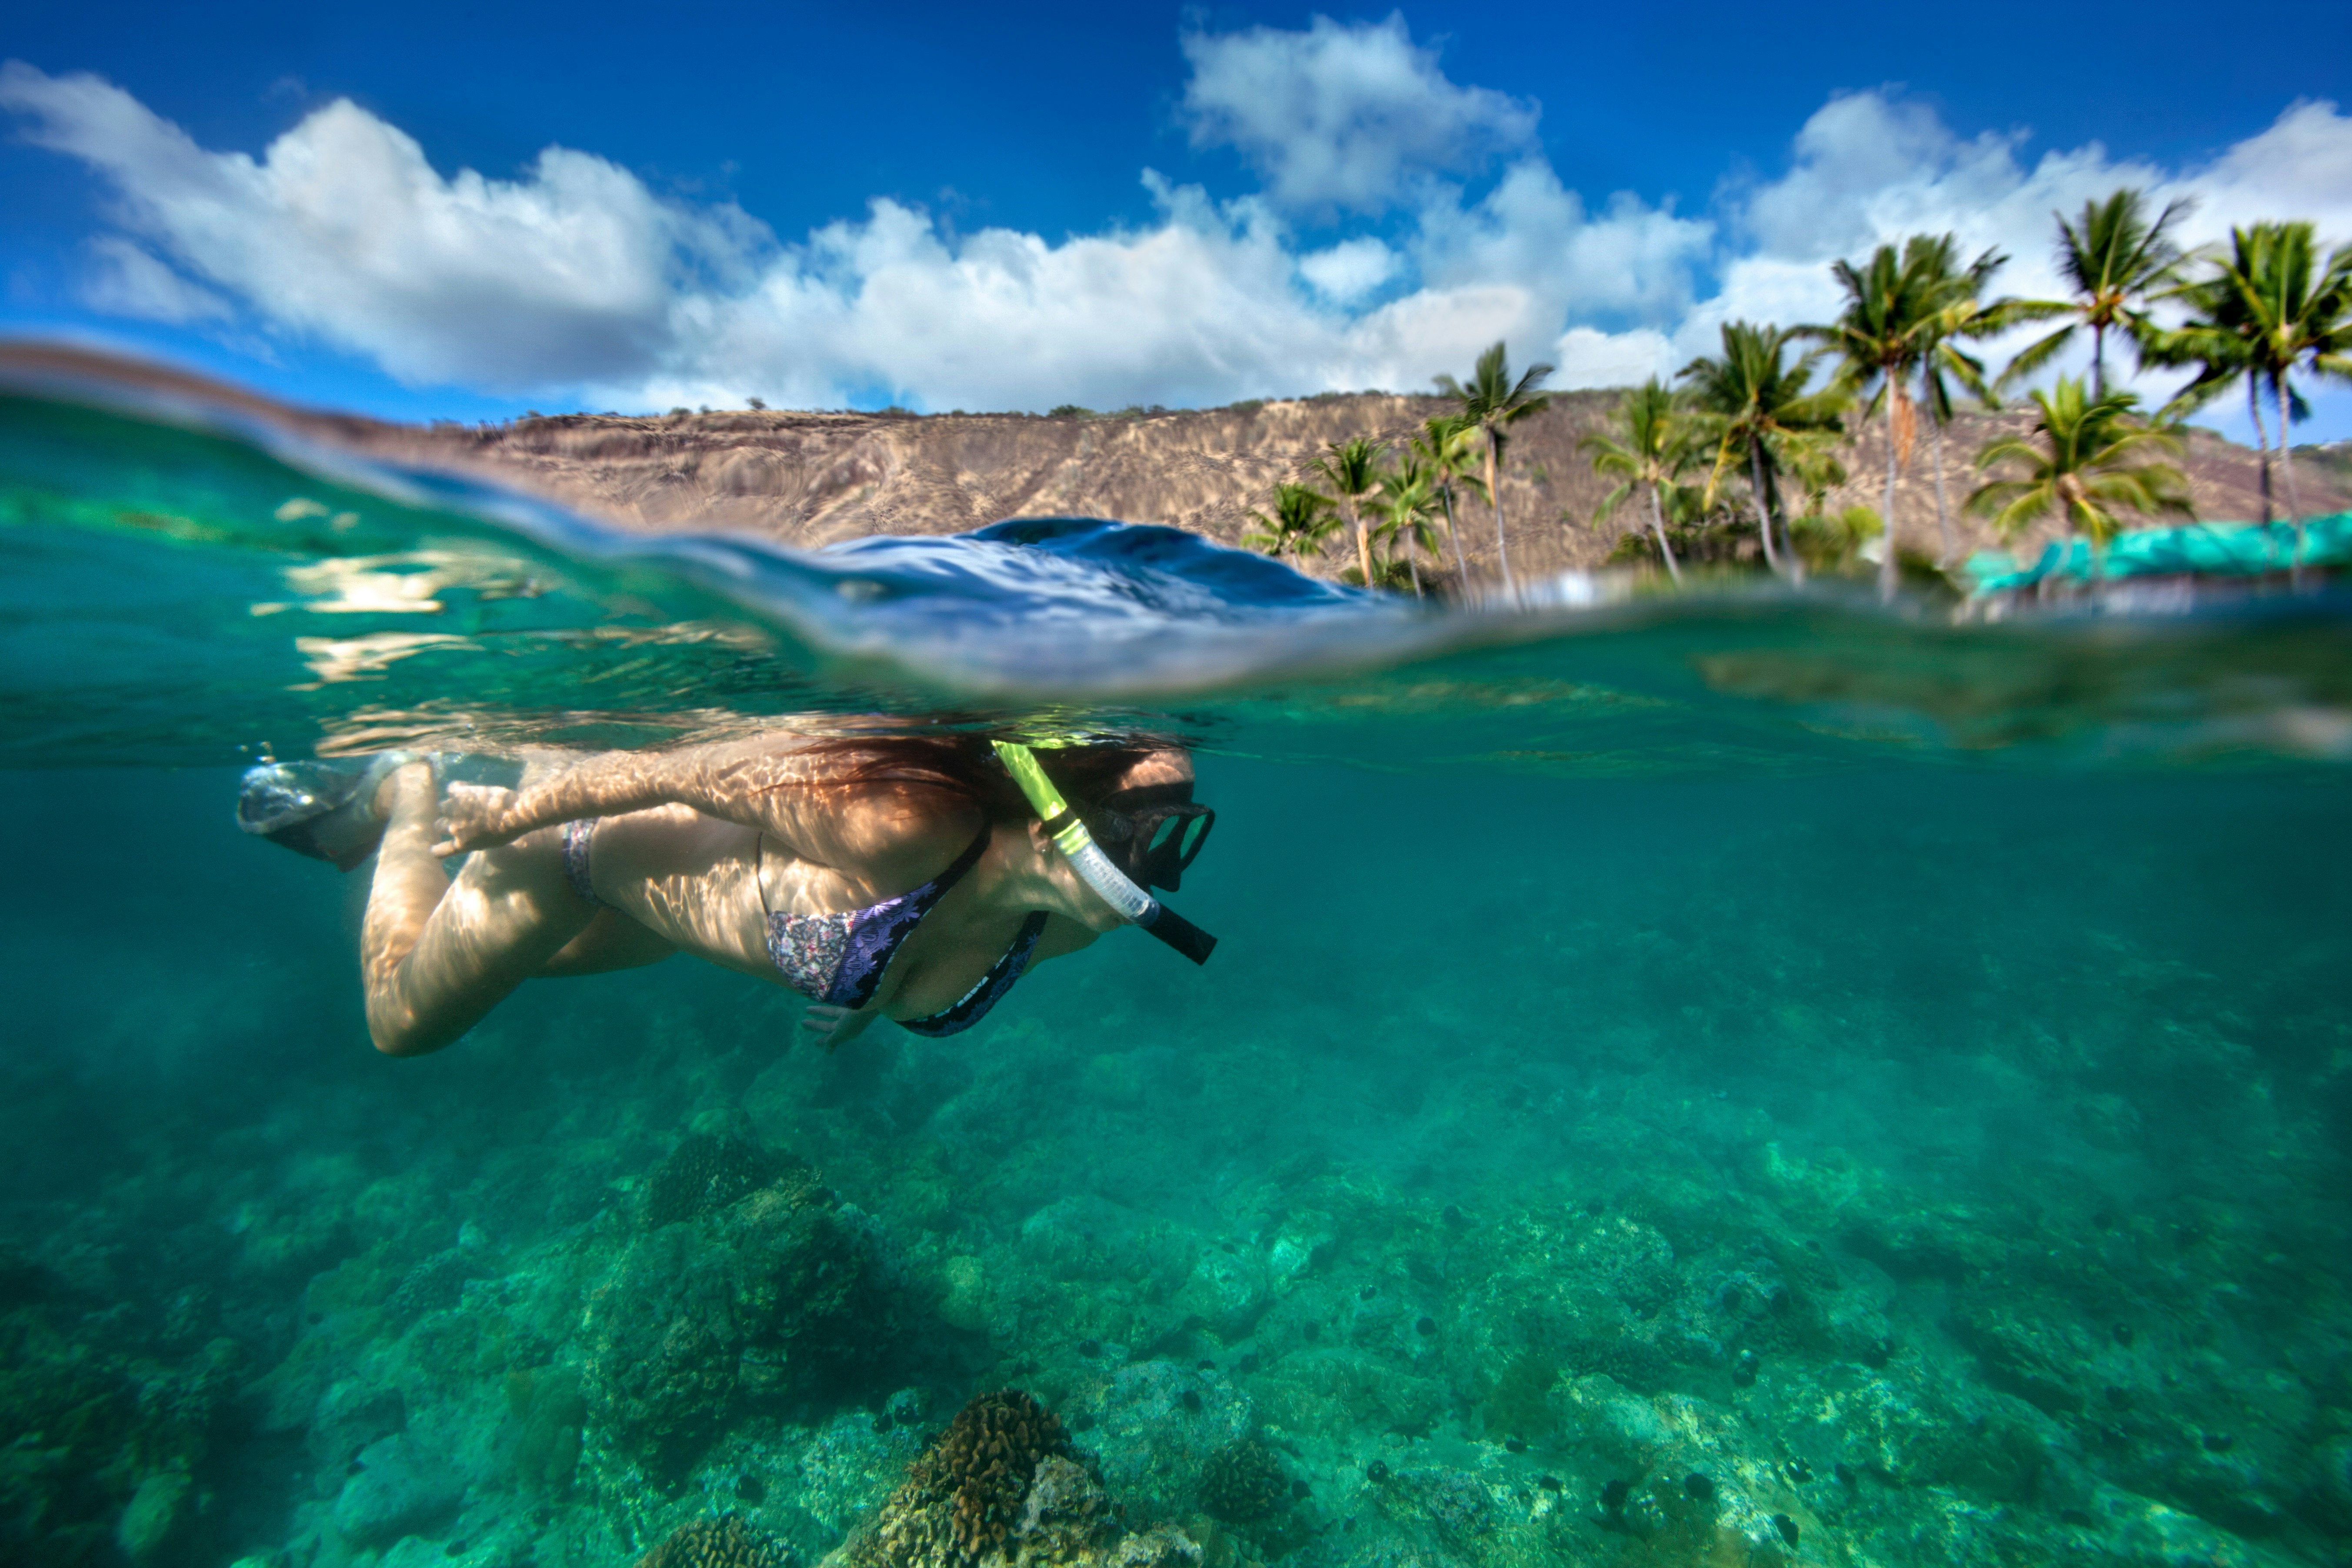 A woman goes snorkeling in a clear bay with coral, in a shot taken half in and half out of the water; Big Island experiences